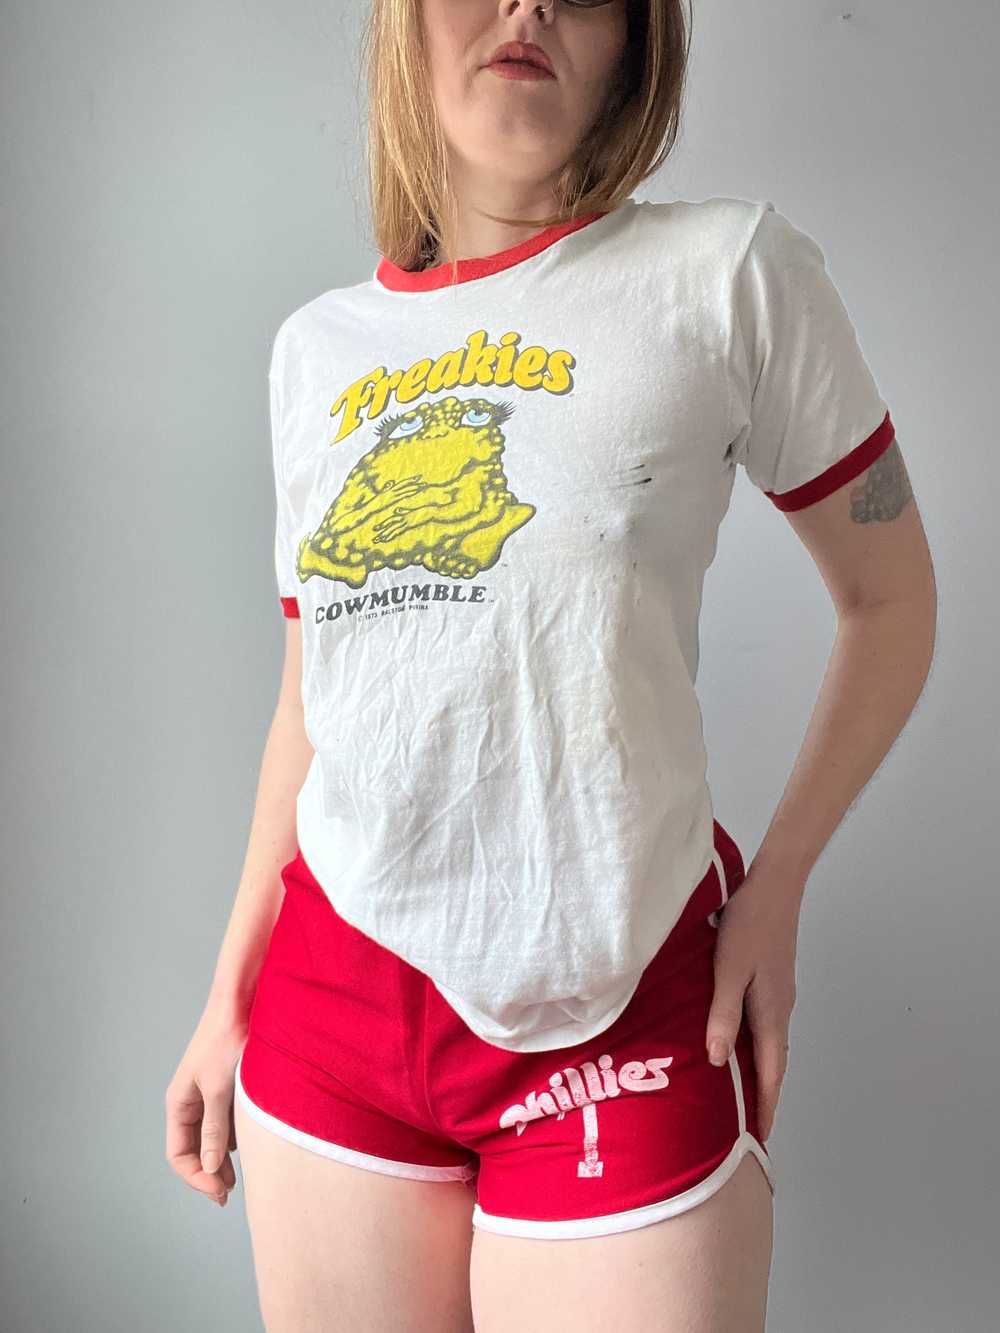 1970s Freakies Cowmumble Ralston Cereal Shirt - image 3